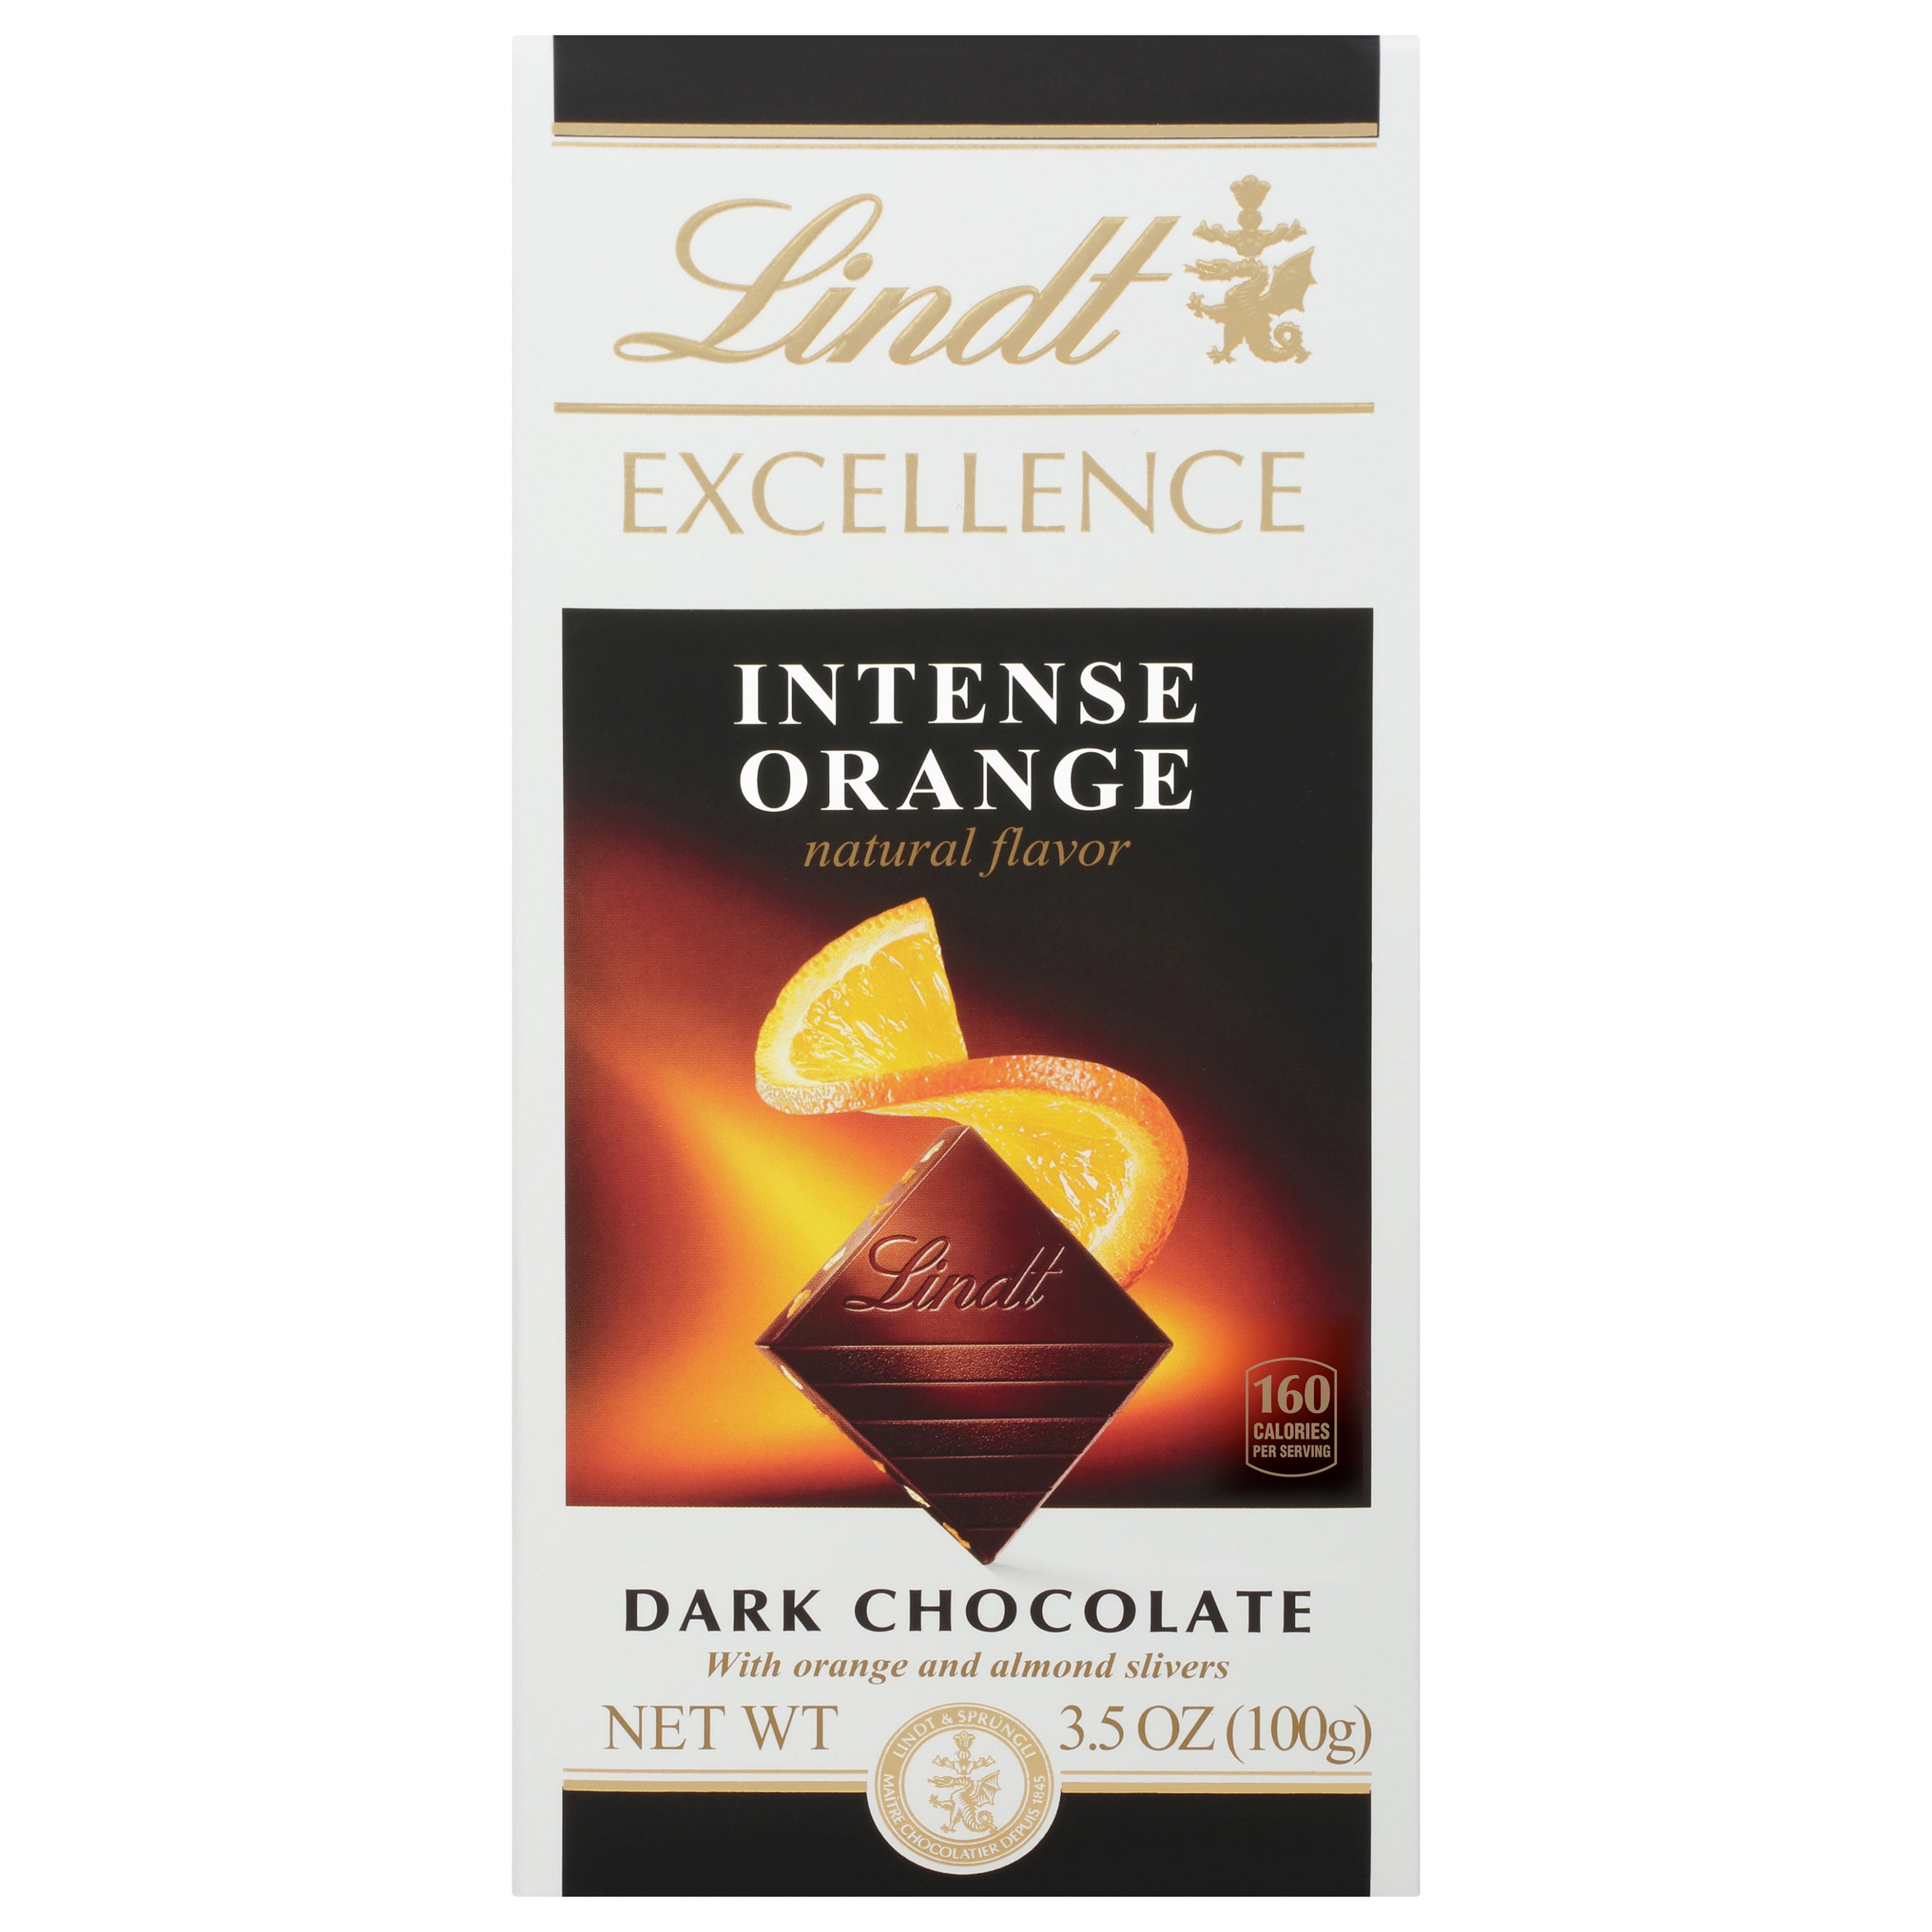 Lindt EXCELLENCE Intense Orange Dark Chocolate Bar, Easter Chocolate Candy, 3.5 oz.